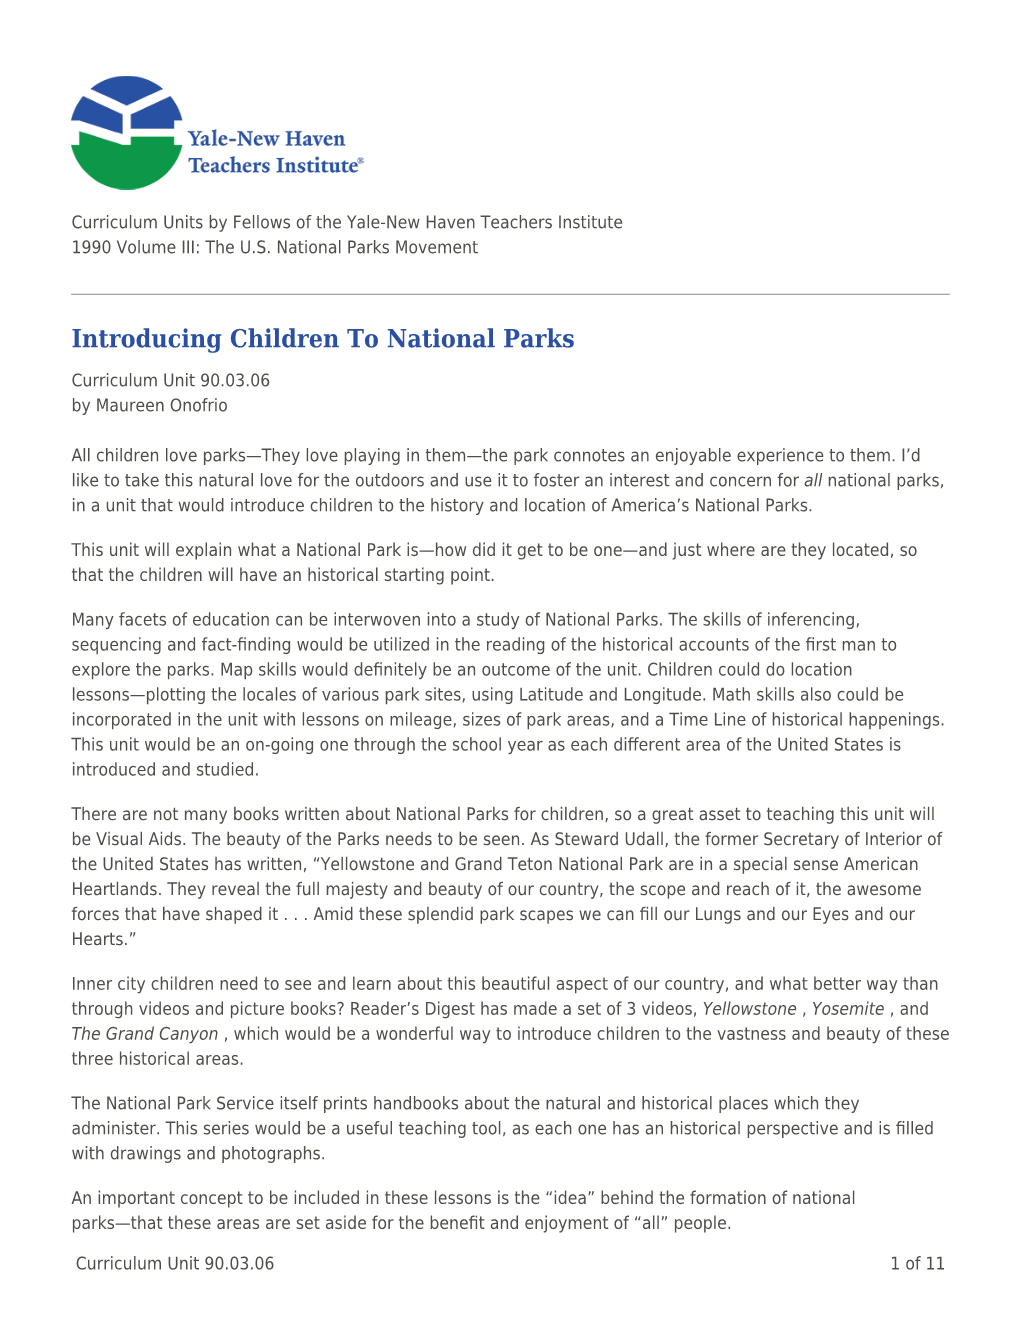 Introducing Children to National Parks